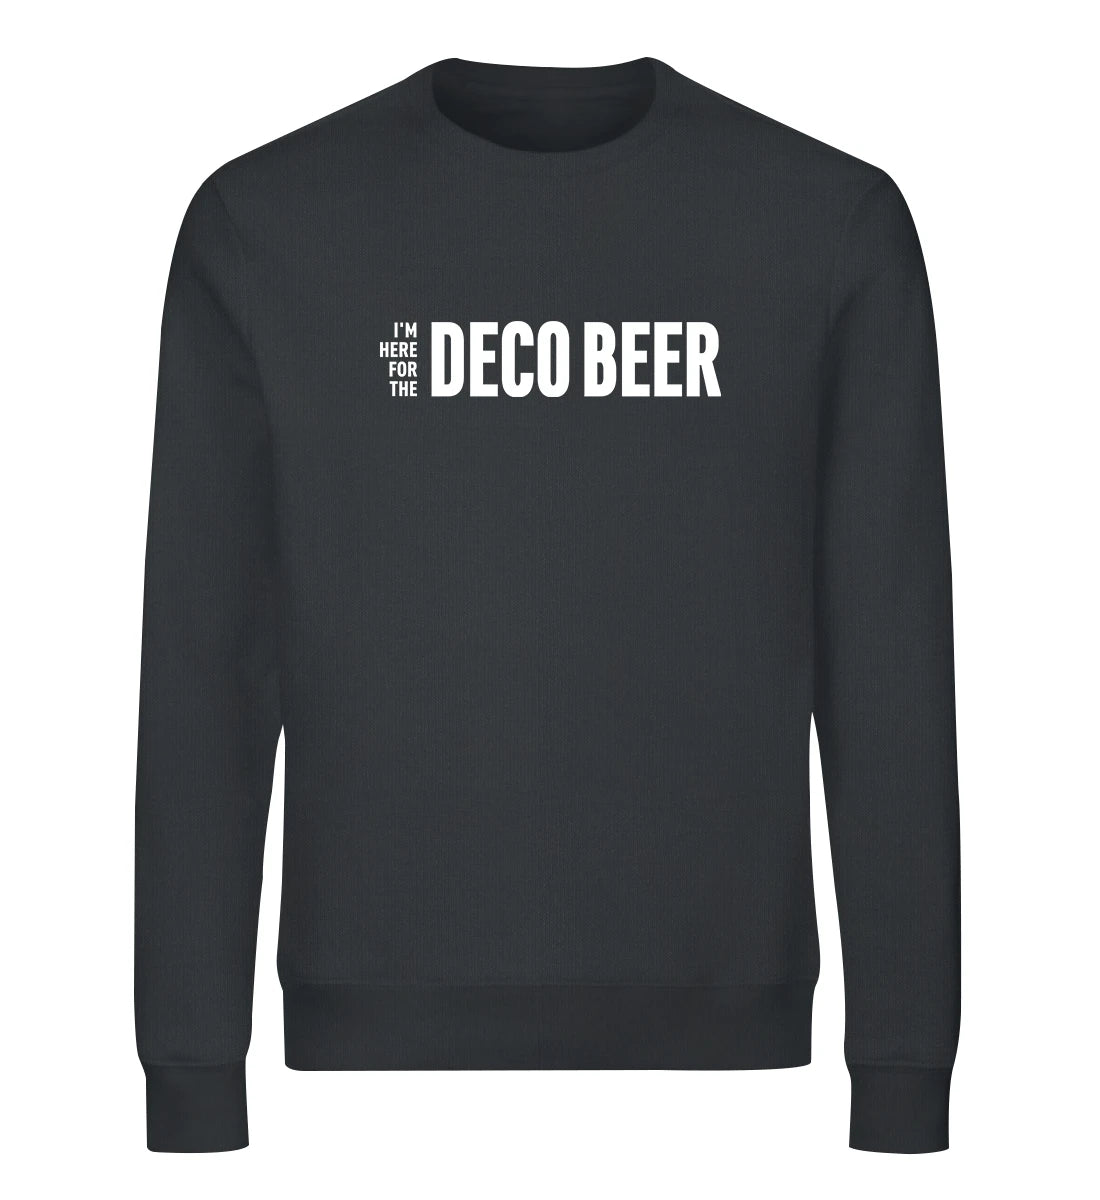 I'm here for the Deco Beer - Bio Sweater